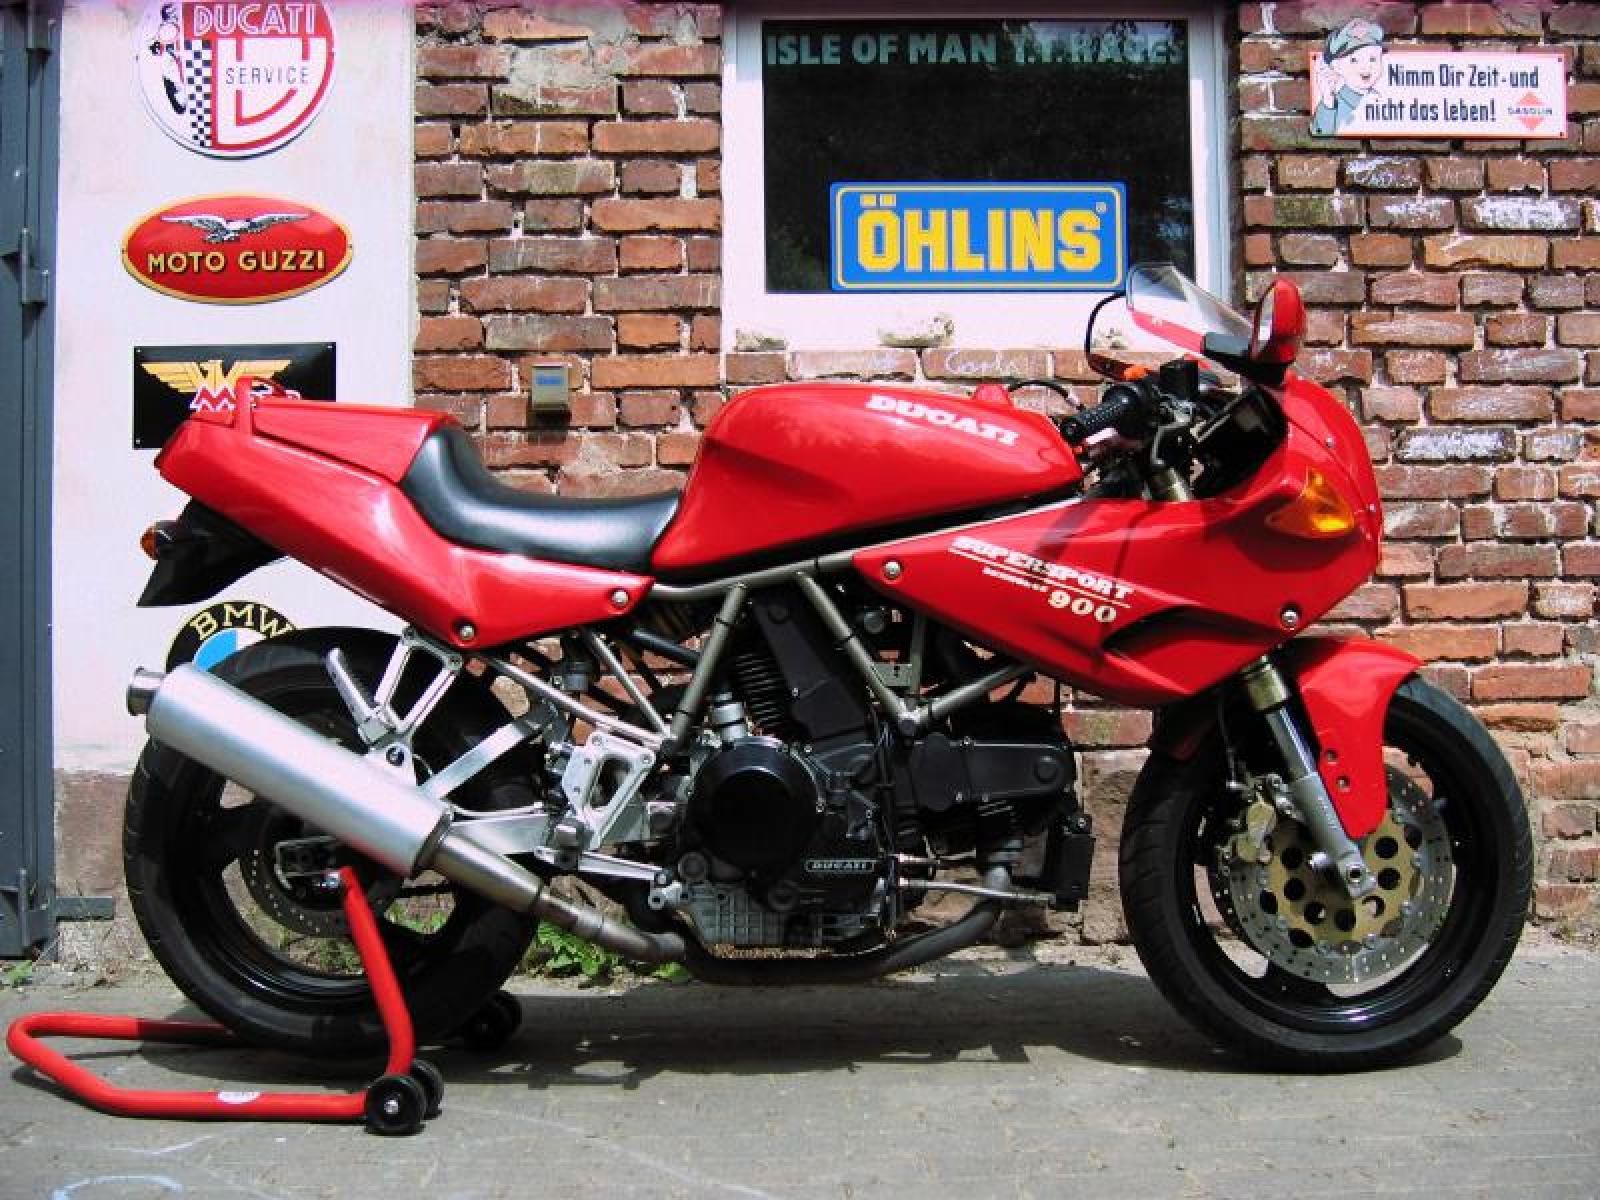 Review of Ducati 900 SS Nuda 2001: pictures, live photos ...